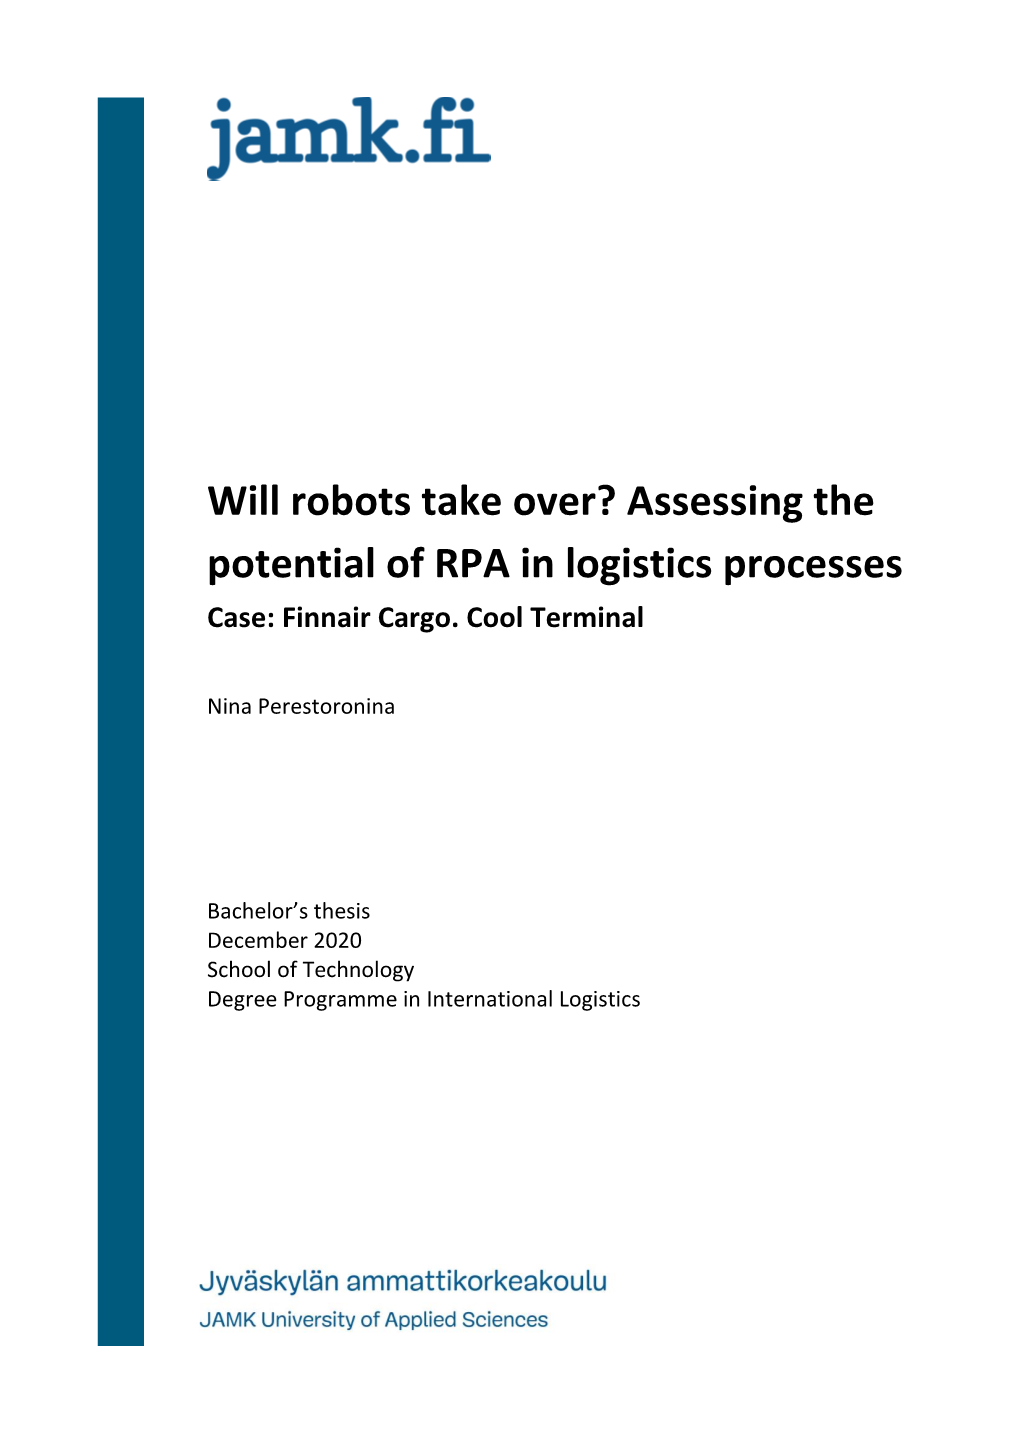 Will Robots Take Over? Assessing the Potential of RPA in Logistics Processes Case: Finnair Cargo